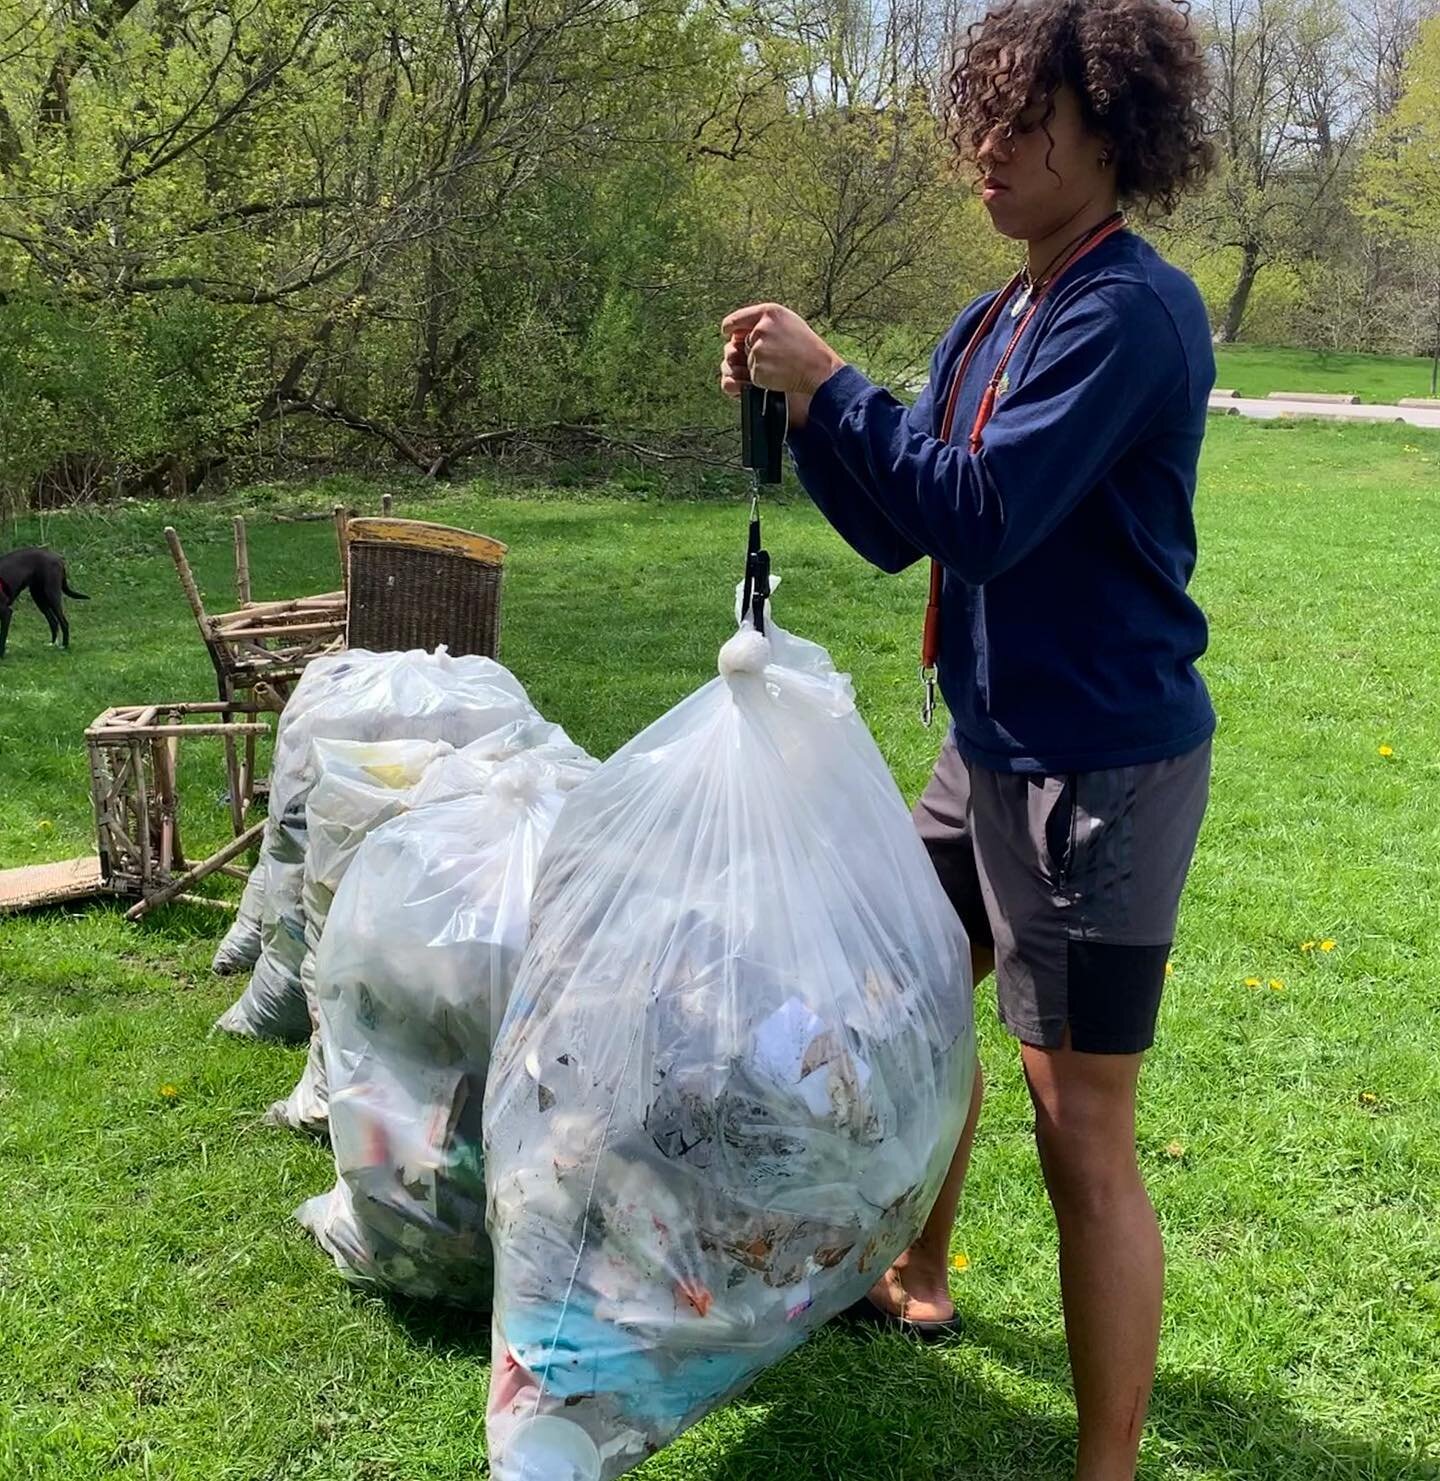 🌗Cleanup #126; Full Moon Cleanup 
🌍285lbs collected, 18 Wastelanders 
🥾1hr 20min cleanup, Kings Mill Park
🙏🏽Free or Donate what you Can 

Thank you to everyone who contributed their precious time and energy. For sinking into the sound bowls and 